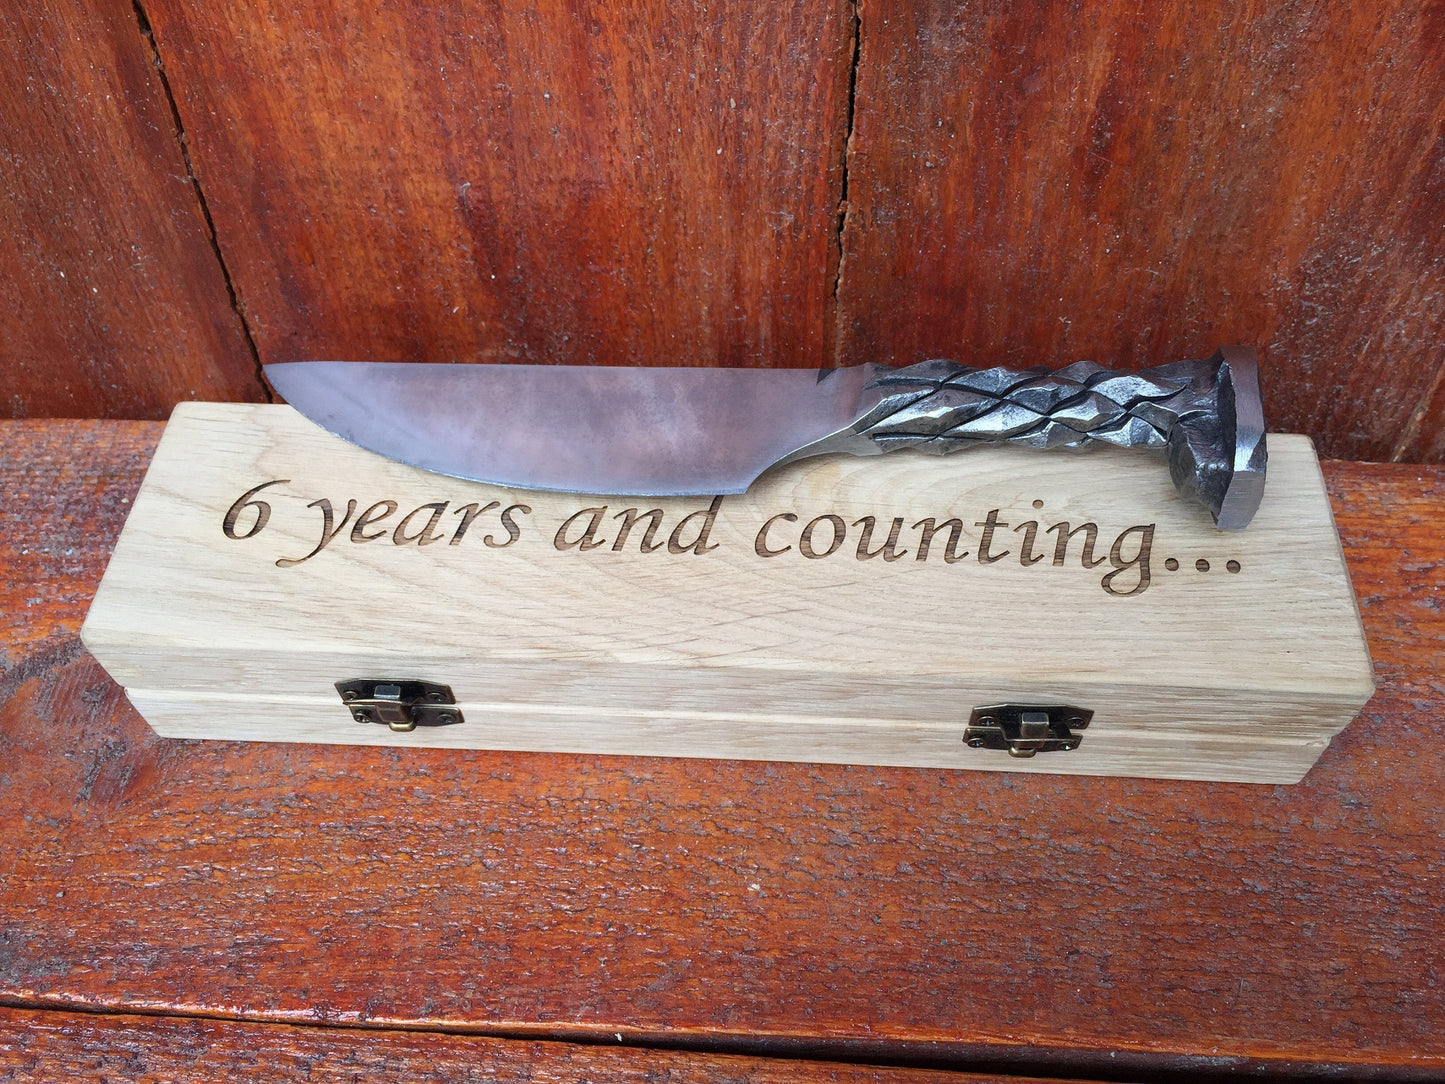 Railroad spike knife in engraved casket/wooden box, iron gift, hunting knife,engraved knife,personalized iron gift,gift for hunter,mens gift